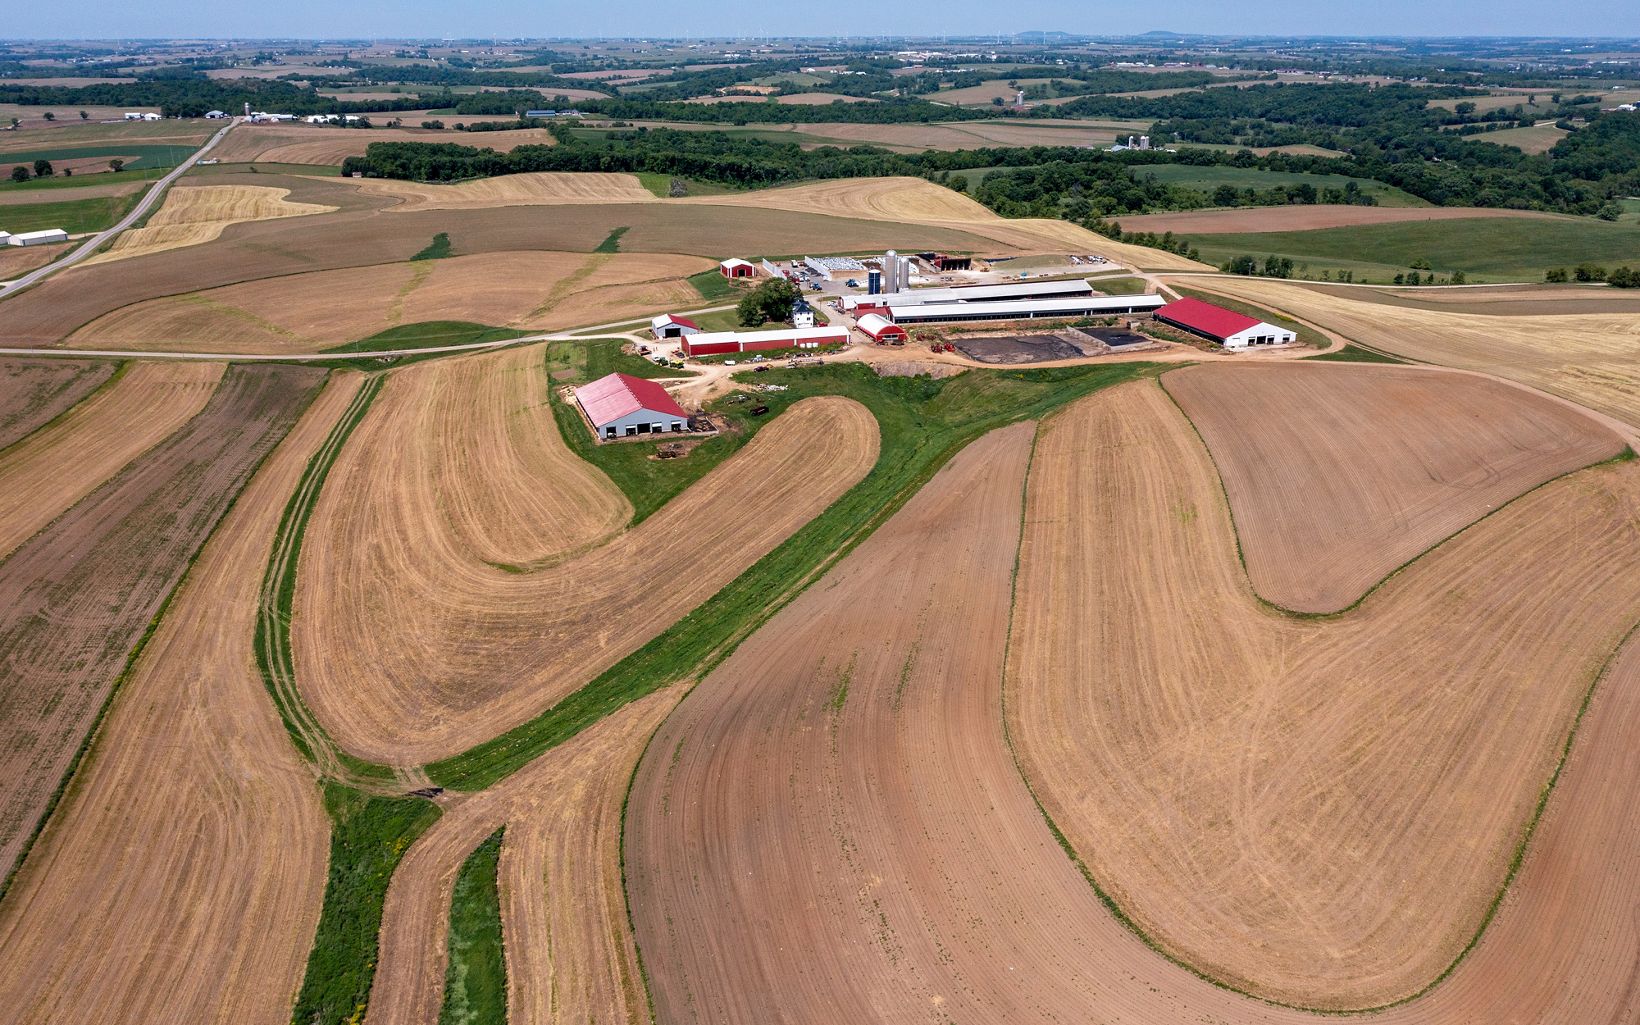 : Aerial view of red-and-white-roofed farm buildings in the middle of broad golden-brown and green farm fields with curvy patterns cut into them.